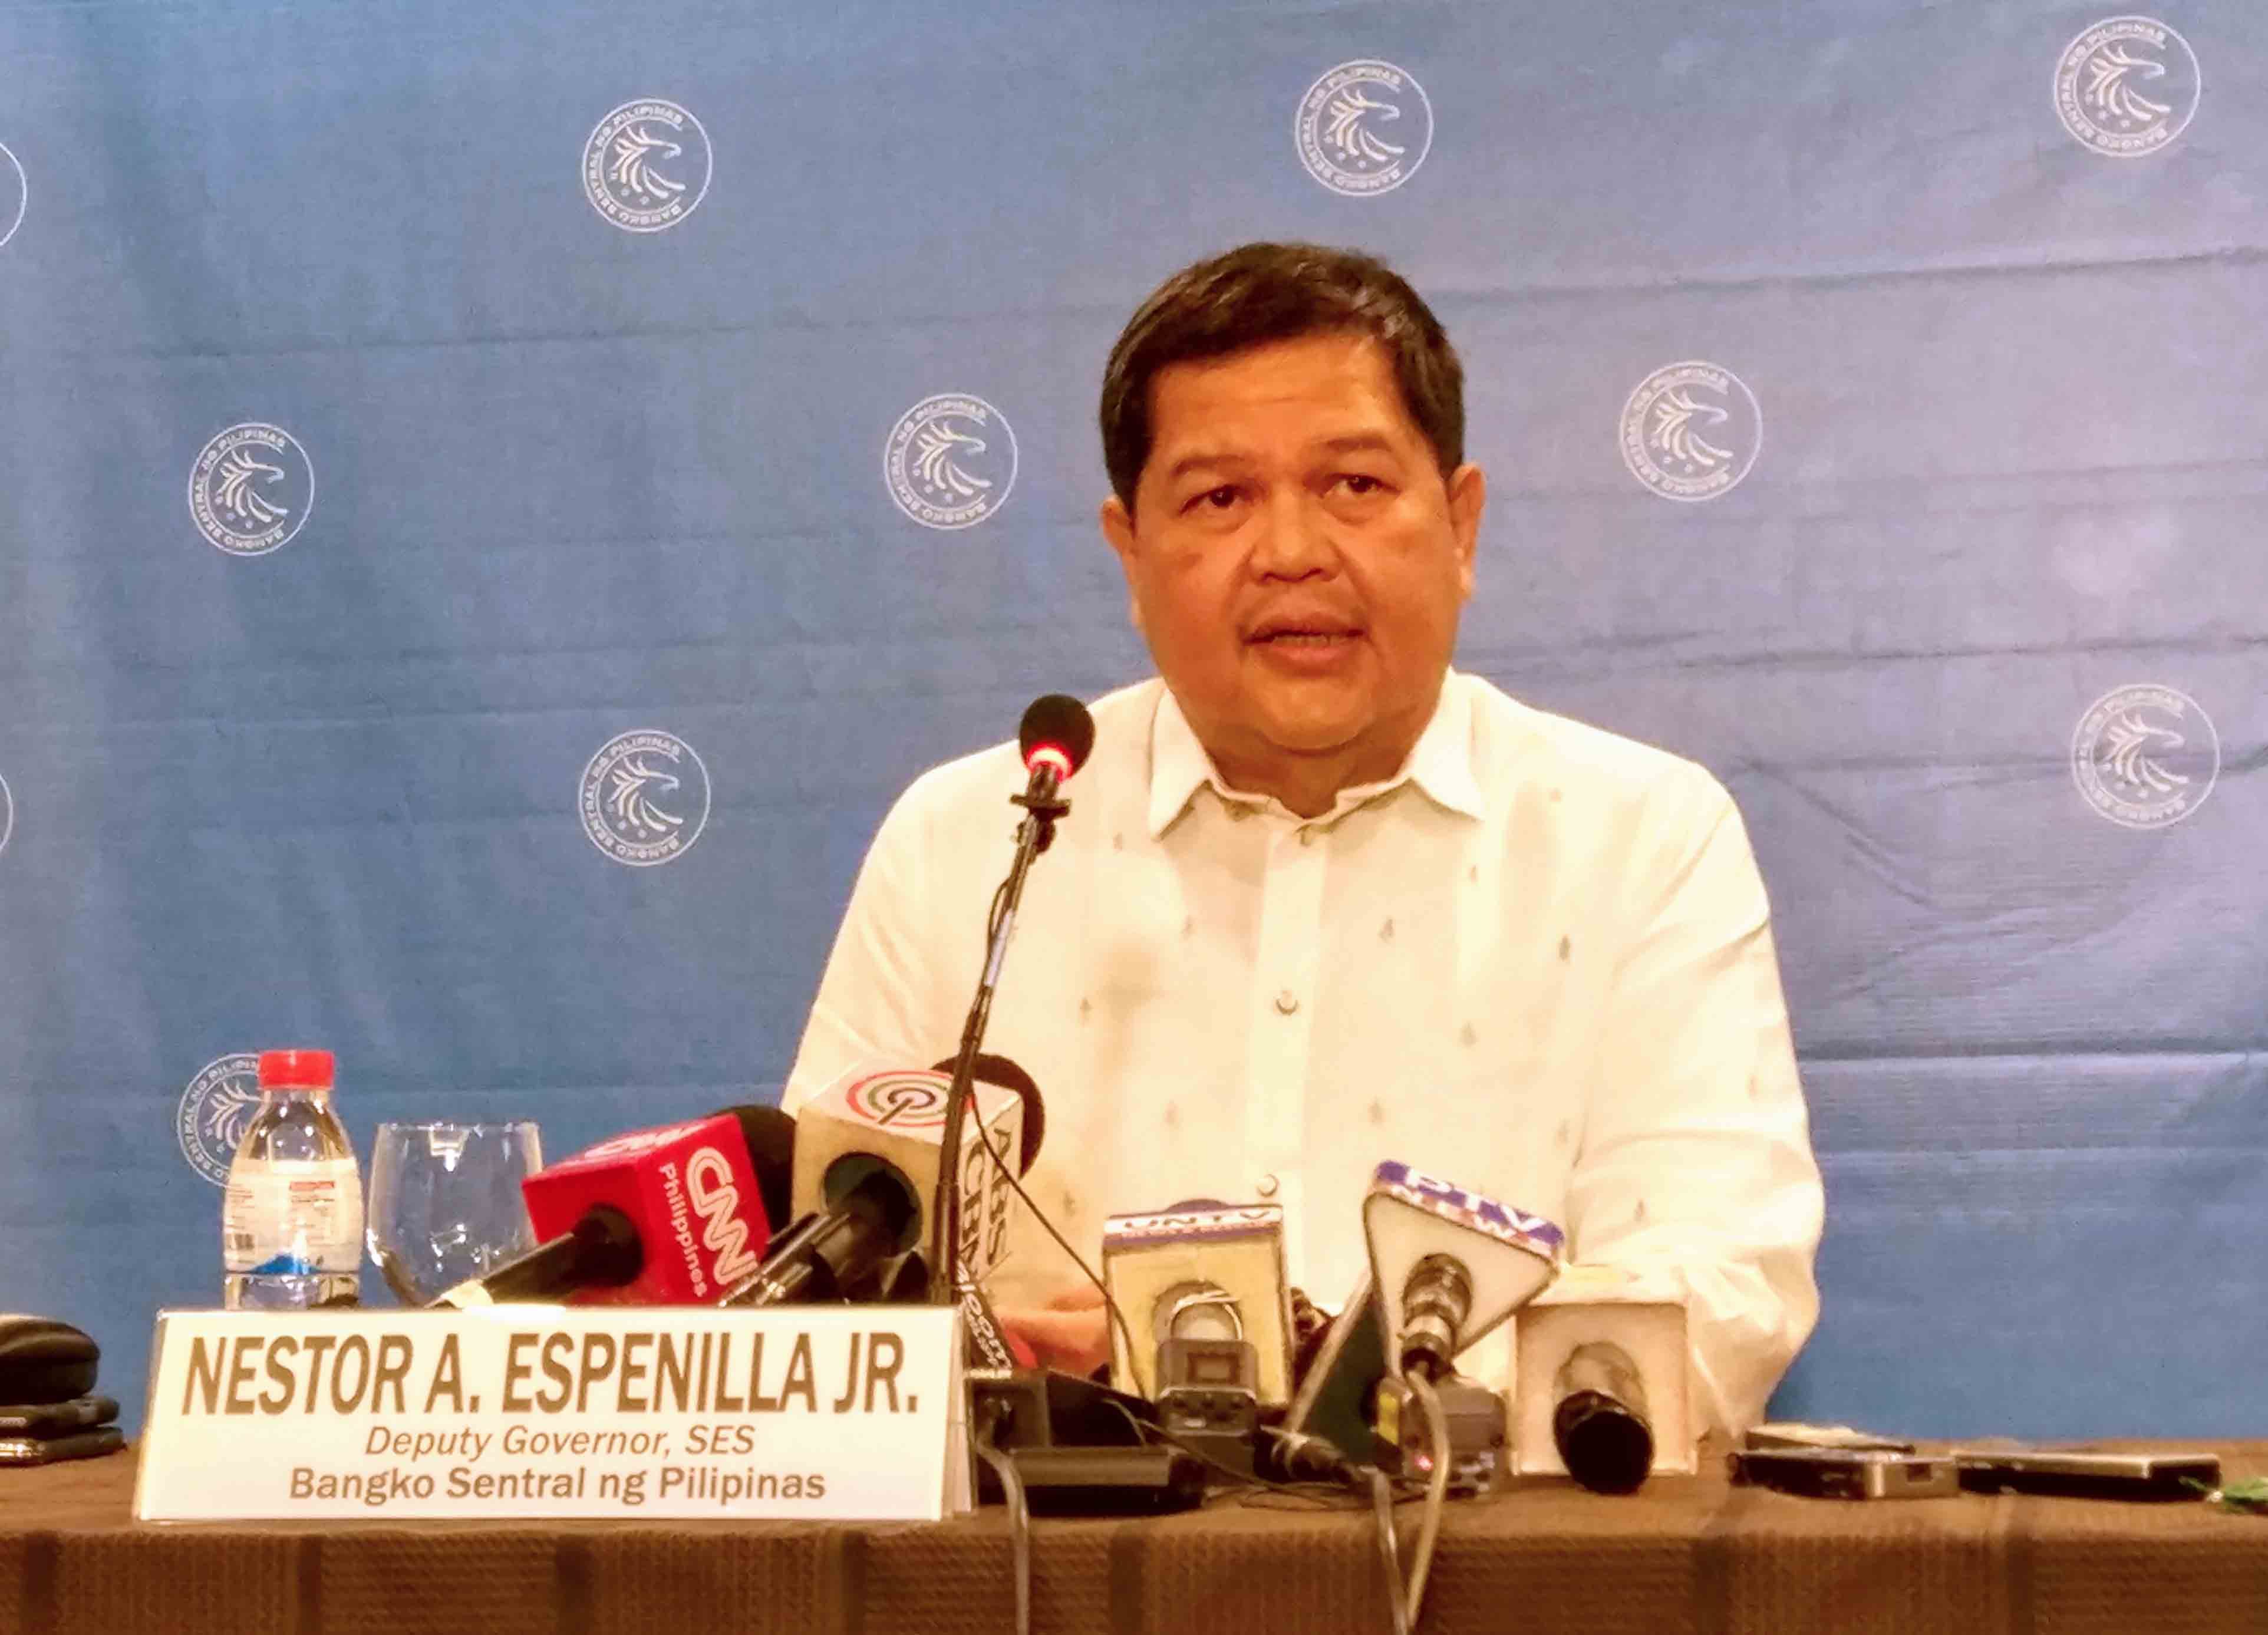 THE CHOSEN ONE. Nestor Espenilla Jr, the incoming governor of the Bangko Sentral ng Pilipinas, has a broader outlook of BSP’s mandate, says former central bank governor Jose Cuisia Jr.  